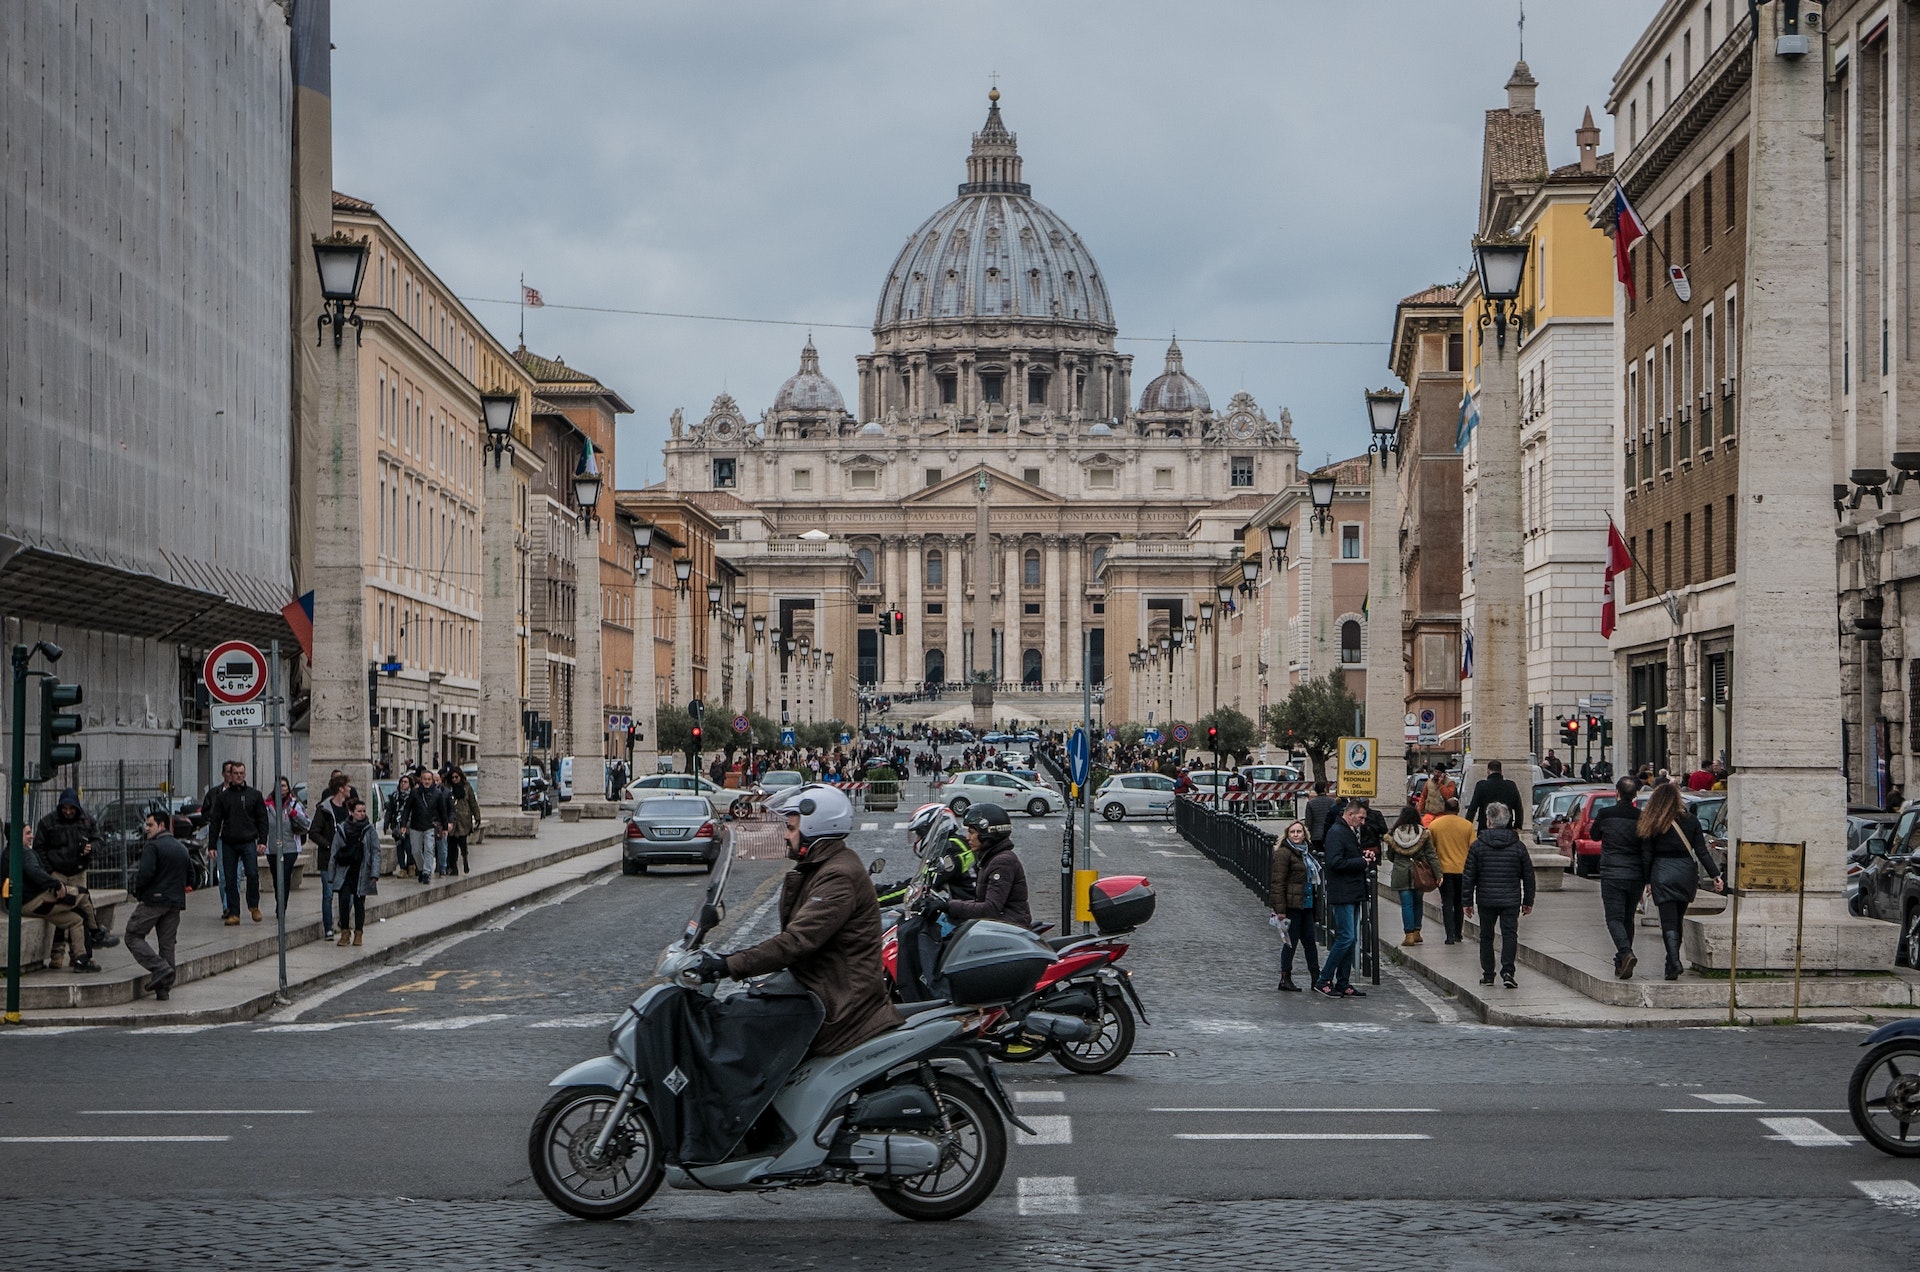 Guided Tours Of The Vatican - Walking In The Footsteps Of The Popes